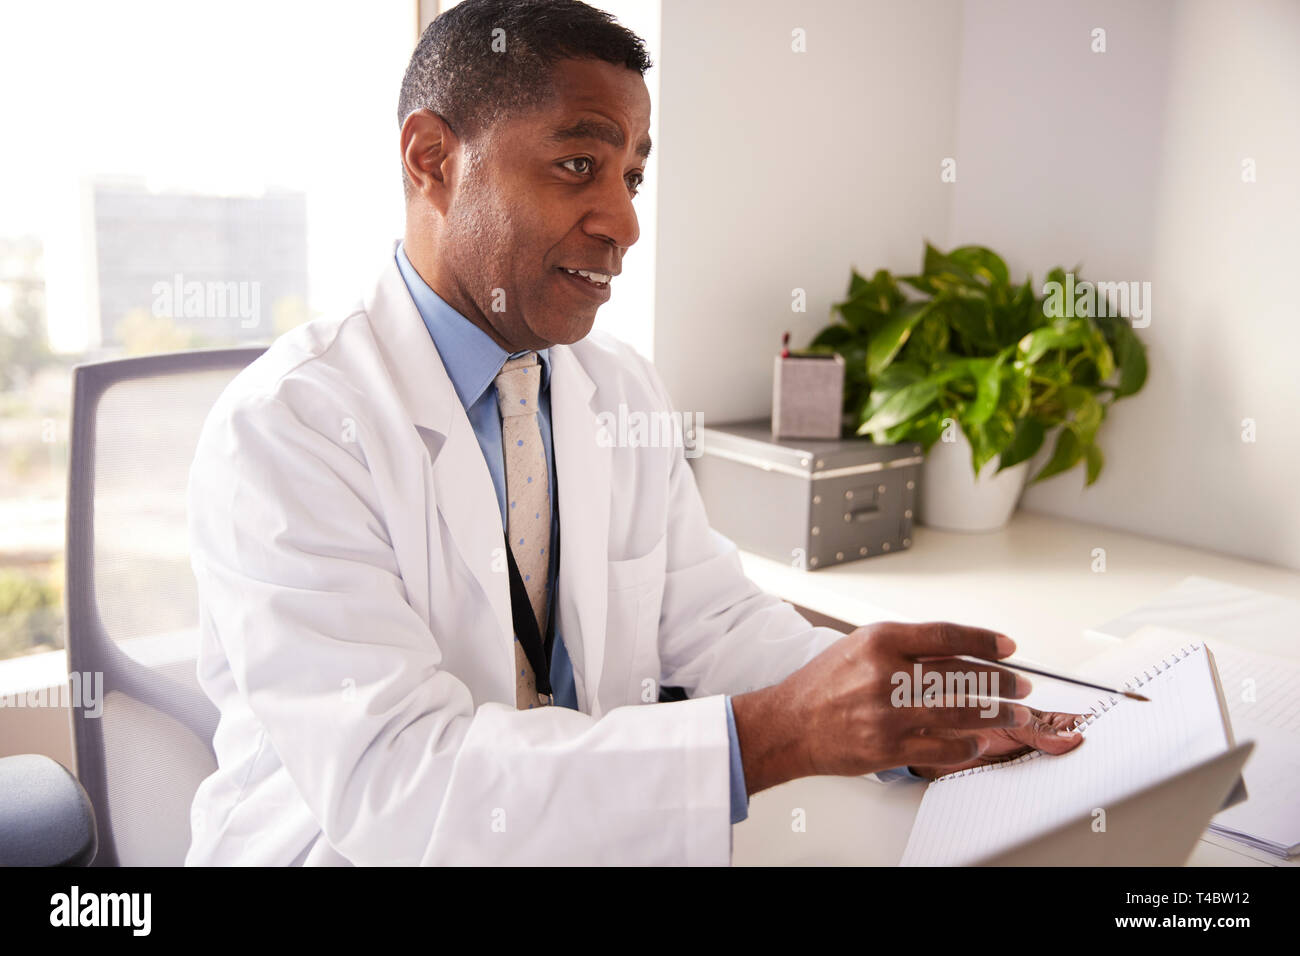 Male Doctor Wearing White Coat In Office Sitting At Desk Working On Laptop Stock Photo